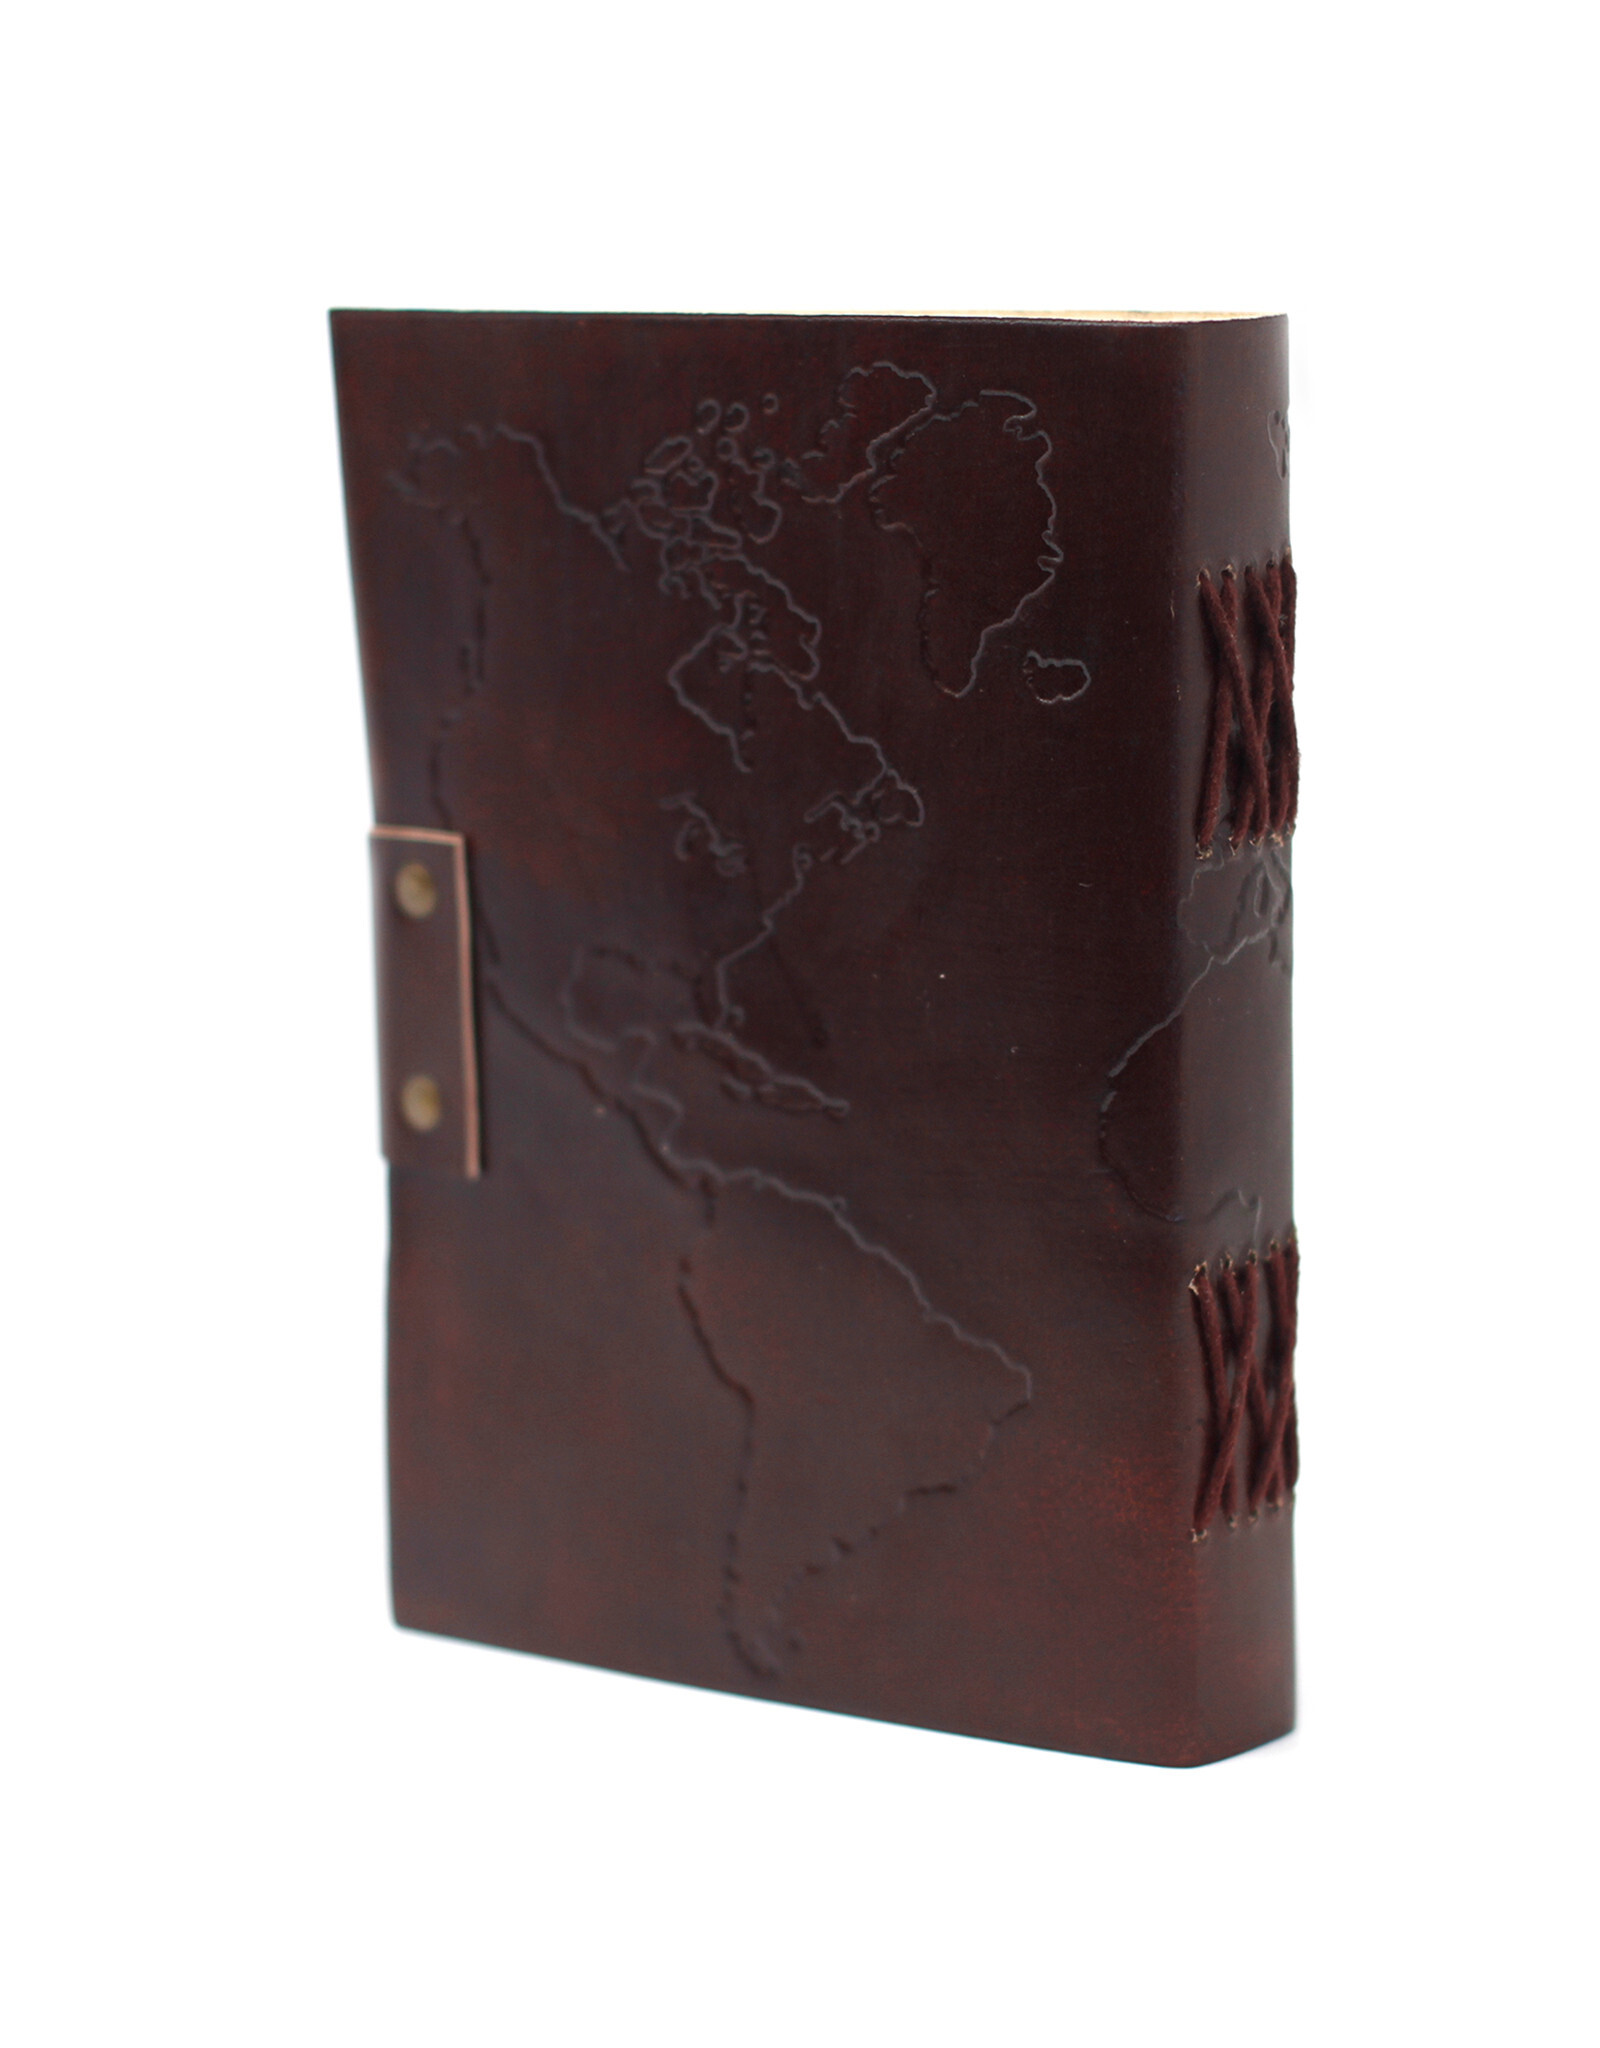 AWG Miscellaneous - Leather Notebook World Map 18x13cm